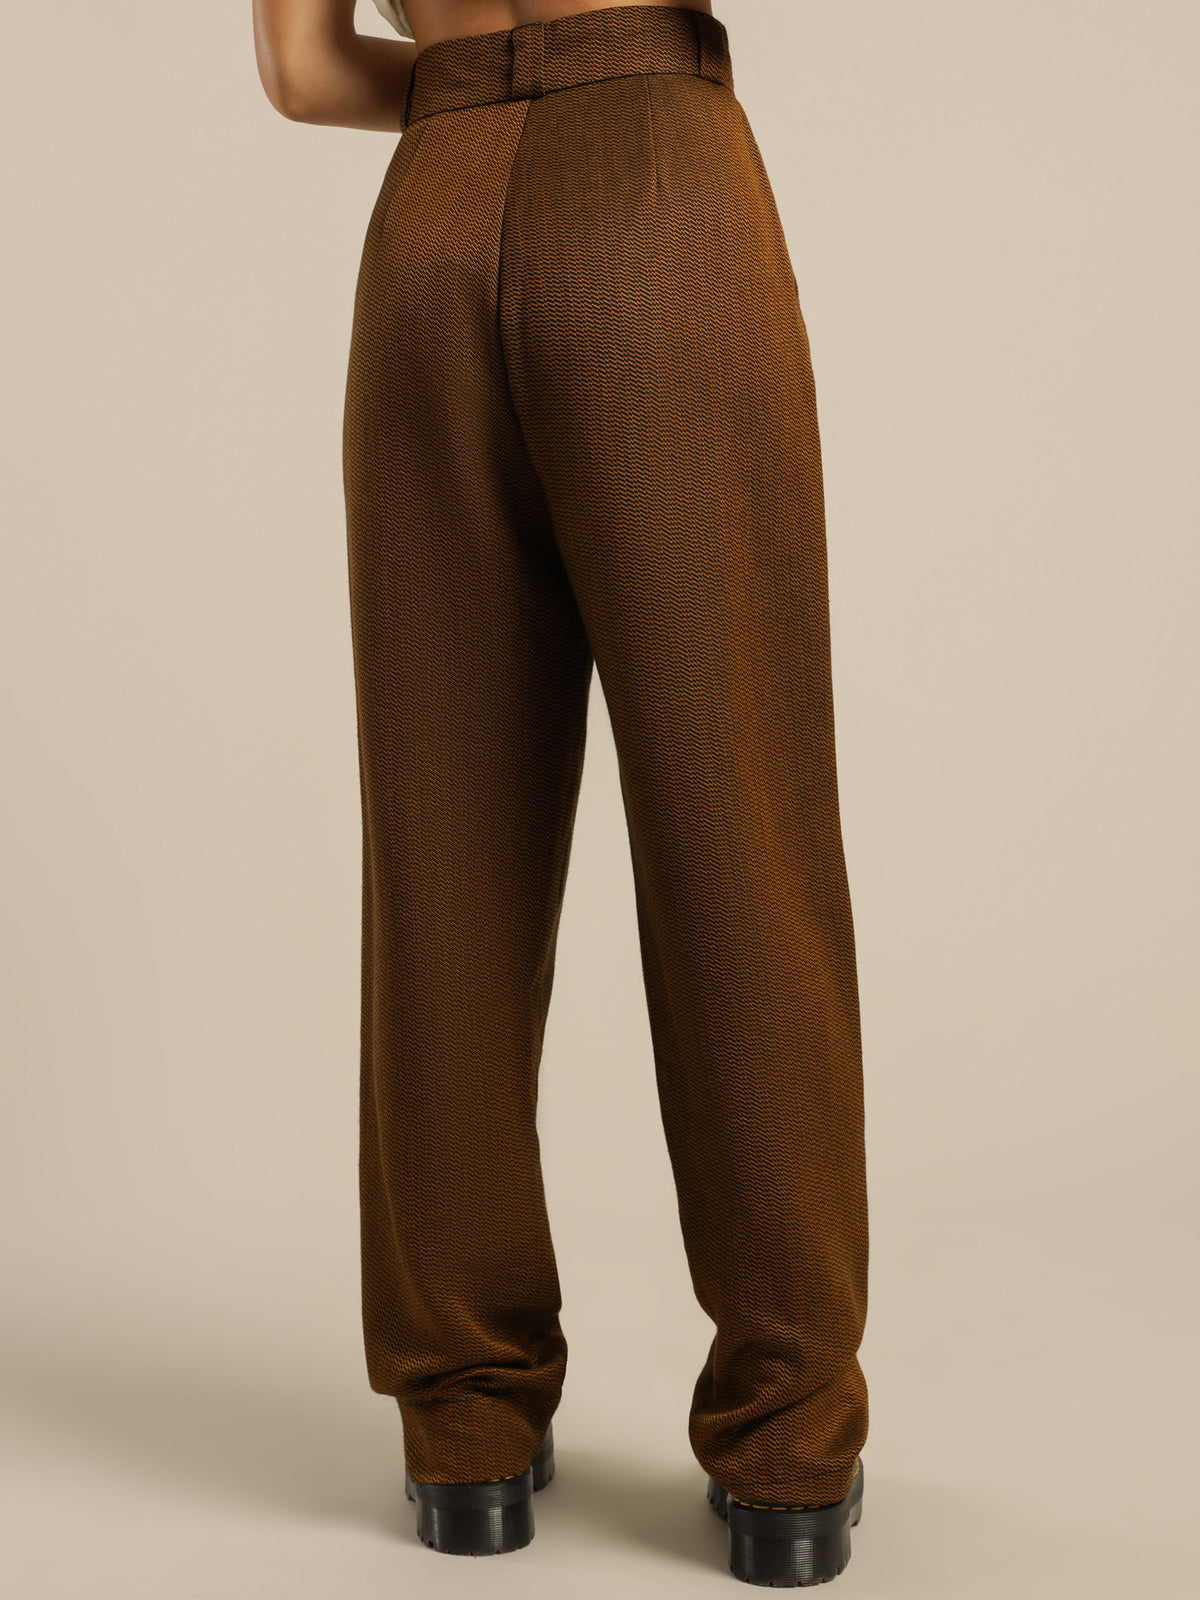 Restraint Tapered Pant in Gold